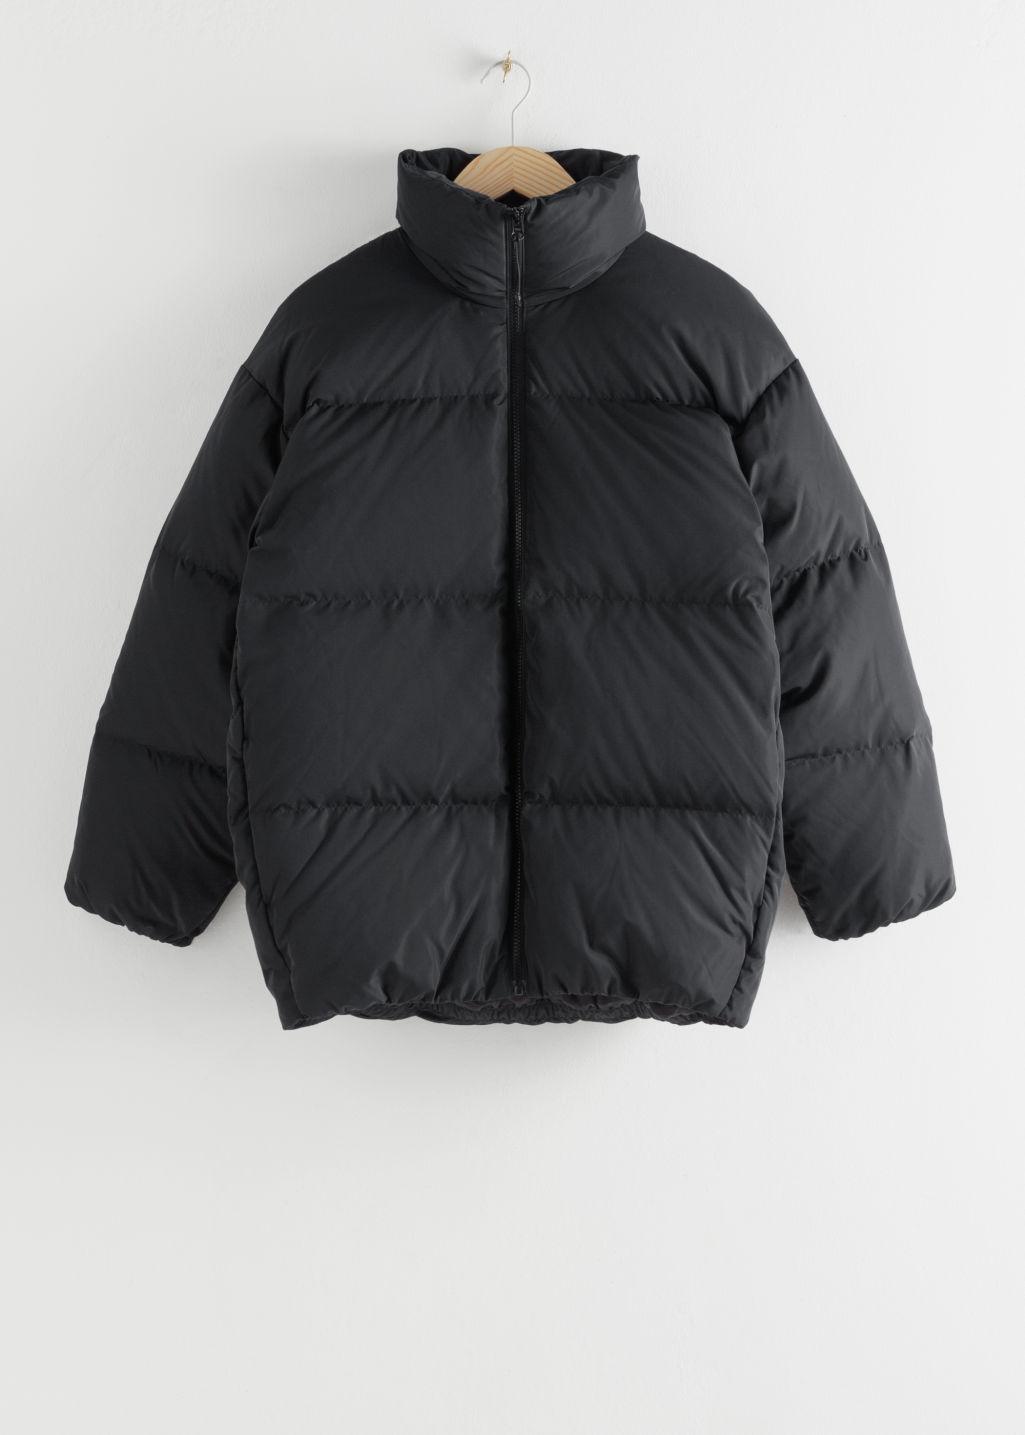 & Other Stories Oversized Down Puffer Coat in Black - Lyst